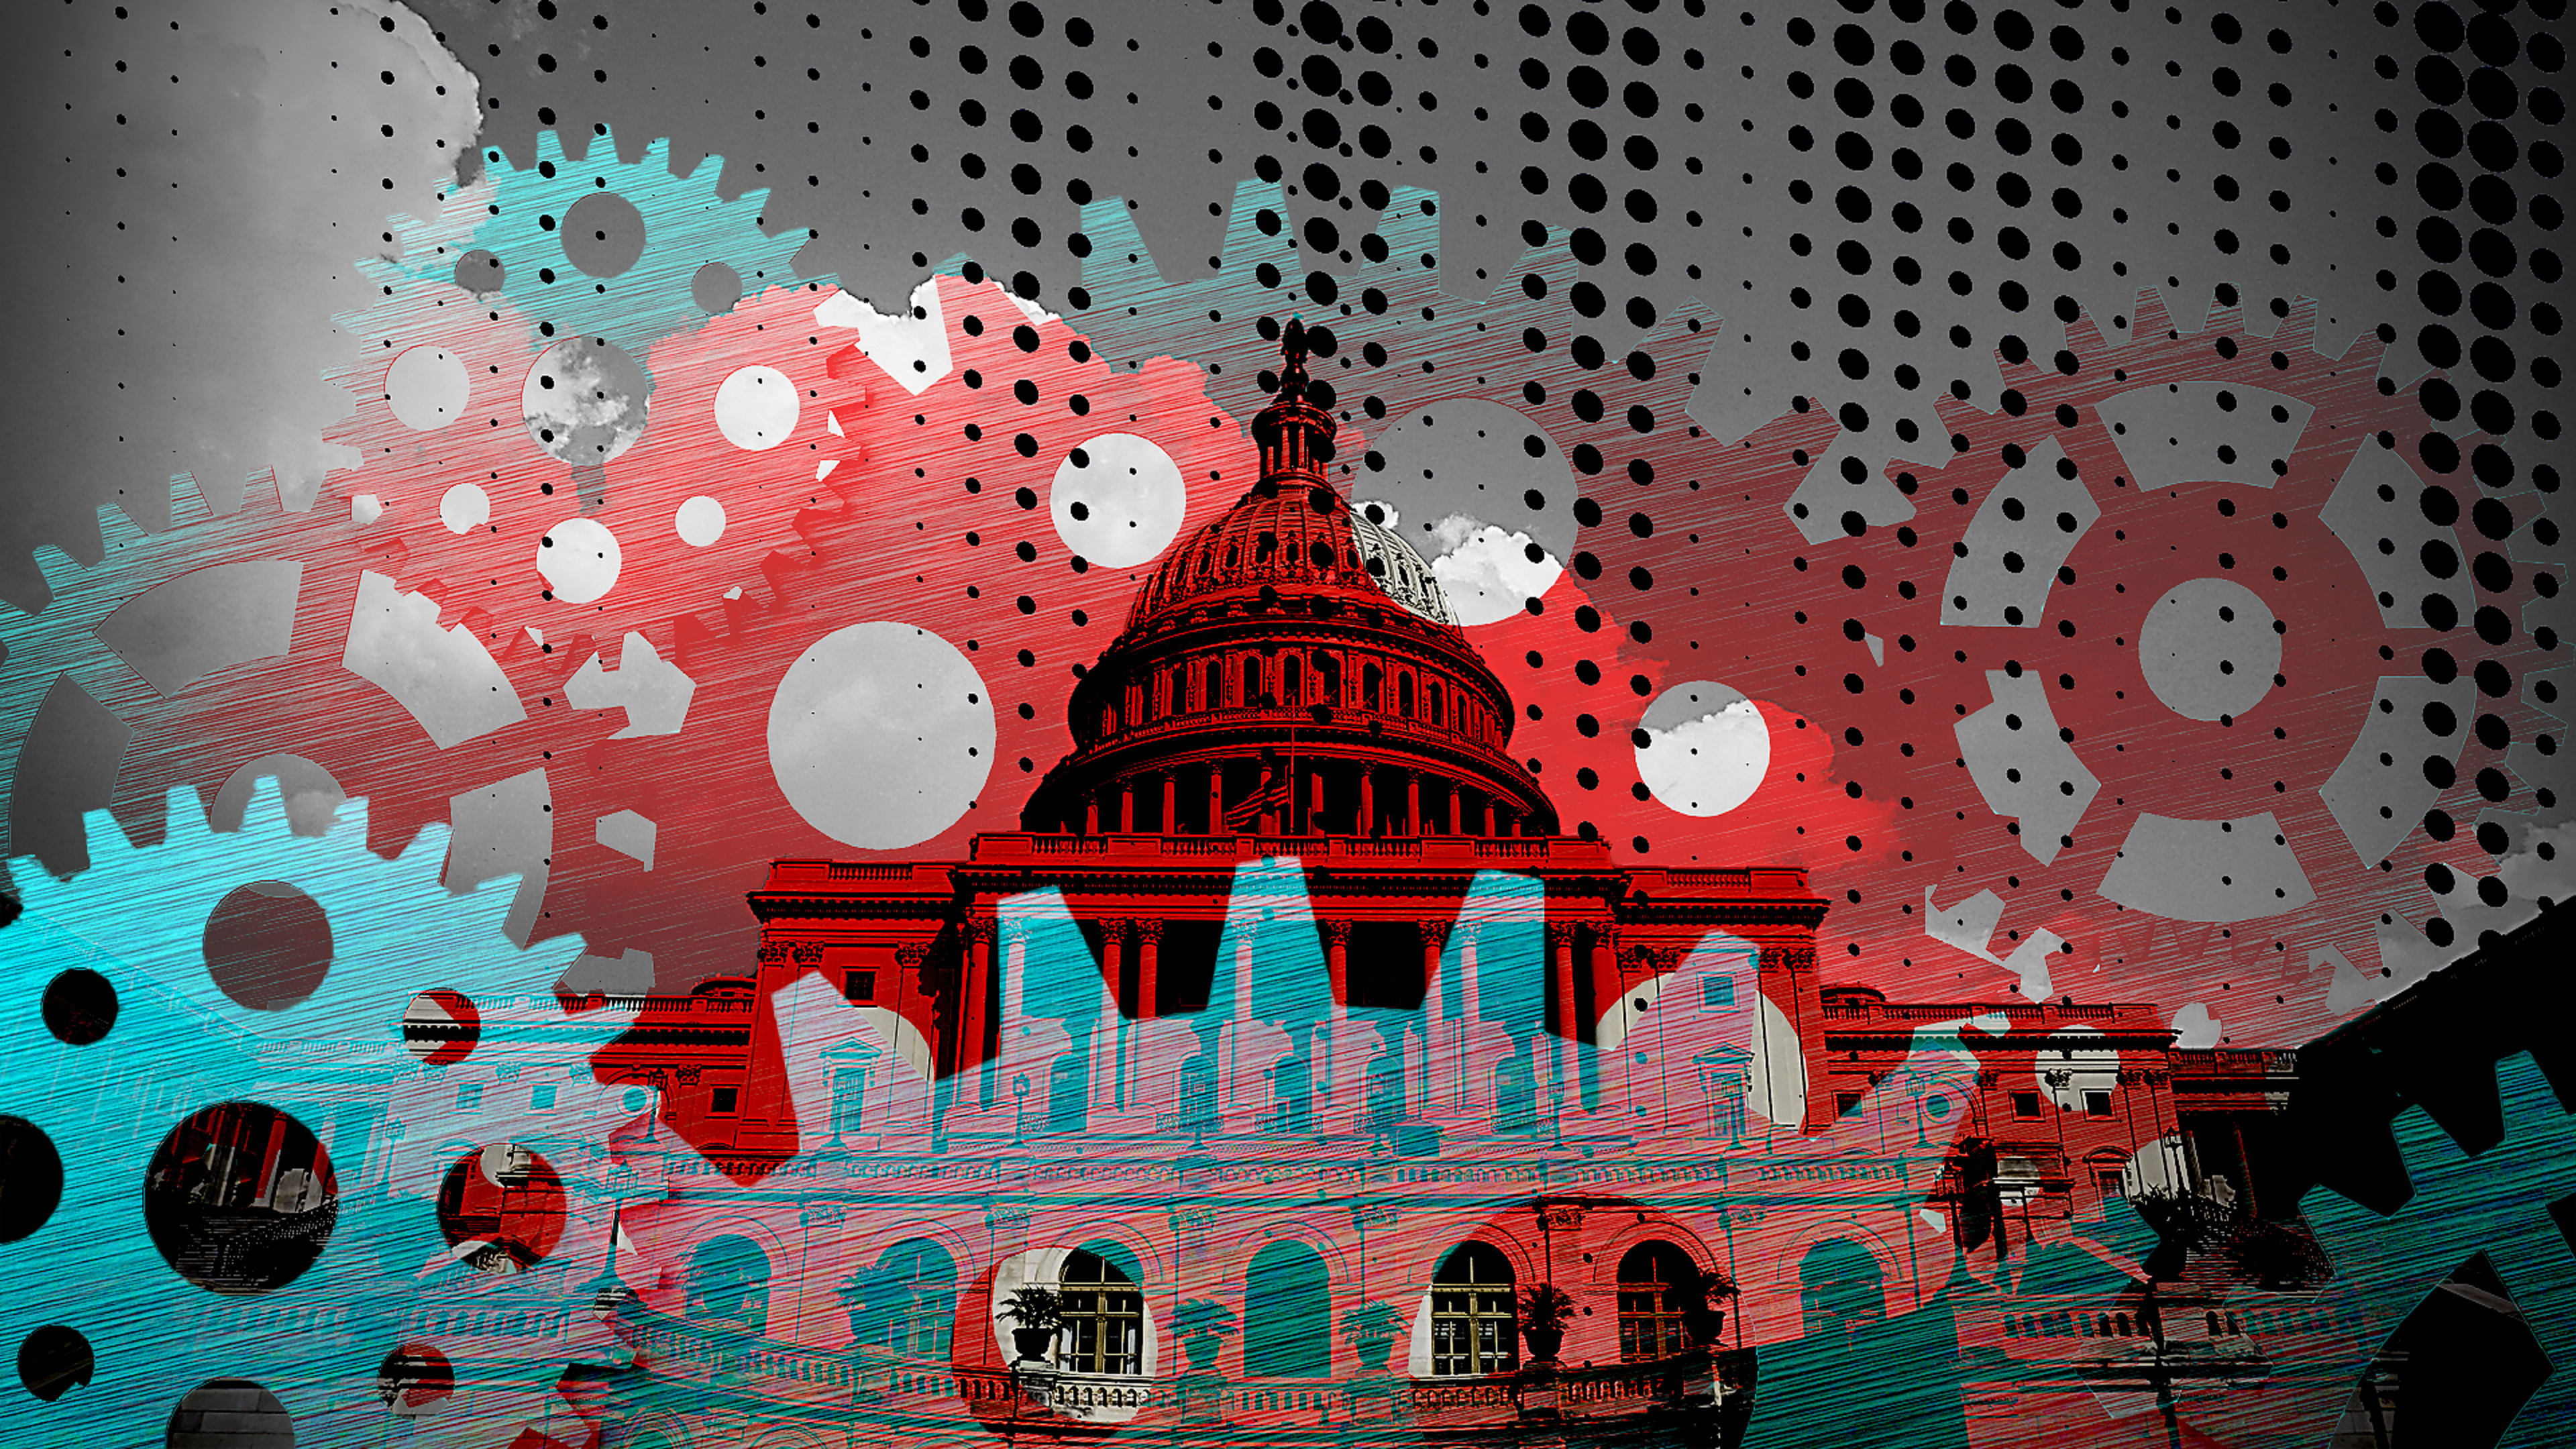 How public-interest technologists can build government that works for everyone